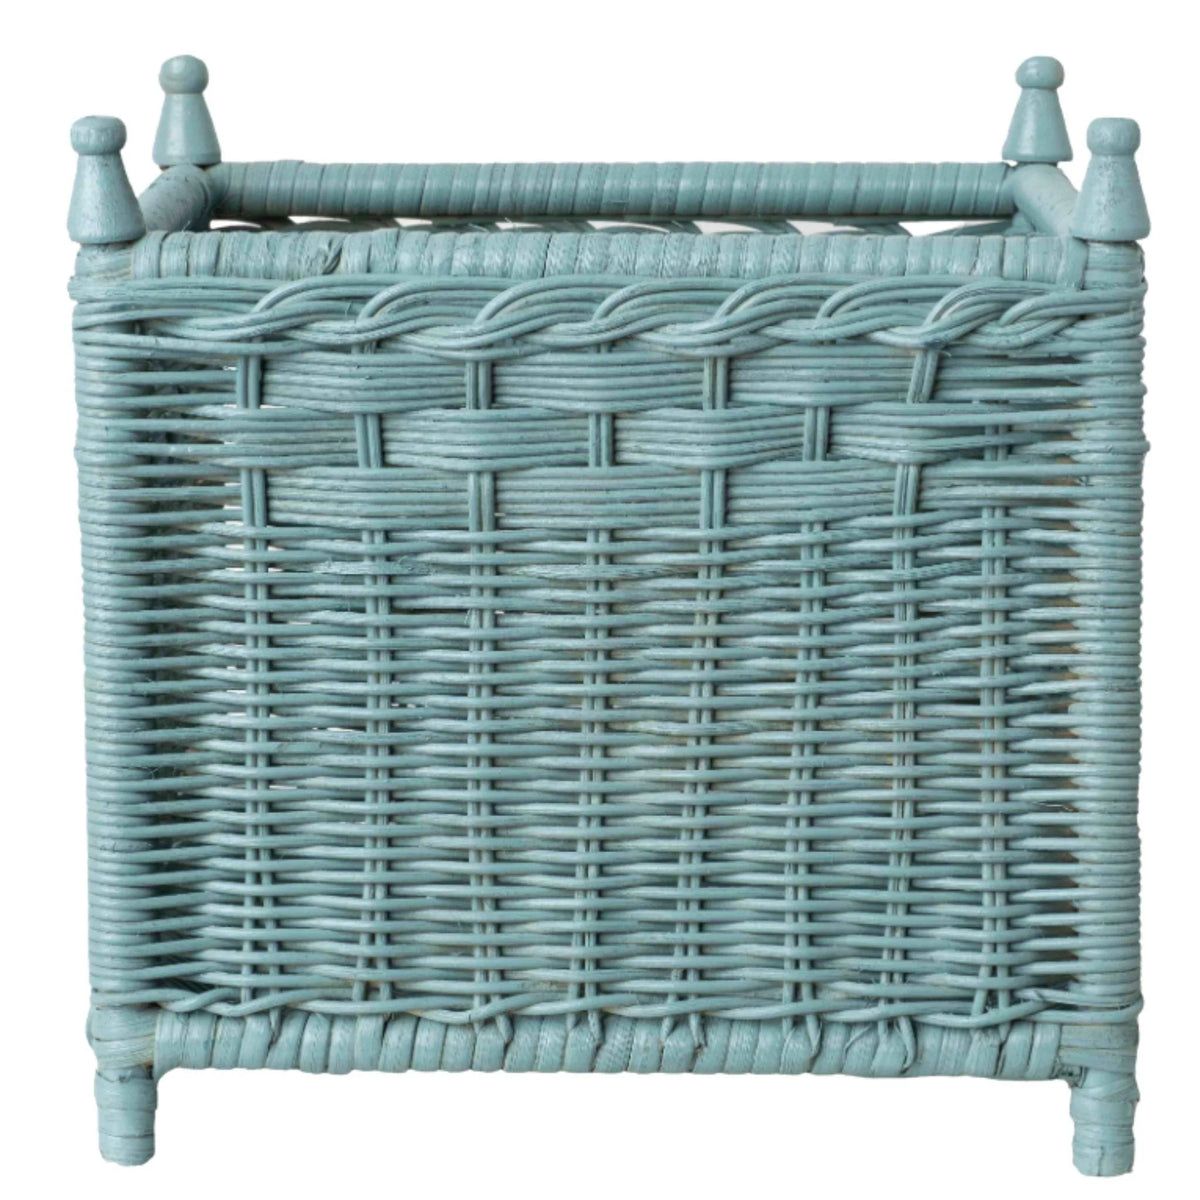 Wicker Box Planters in Cornflower Blue | The Well Appointed House, LLC